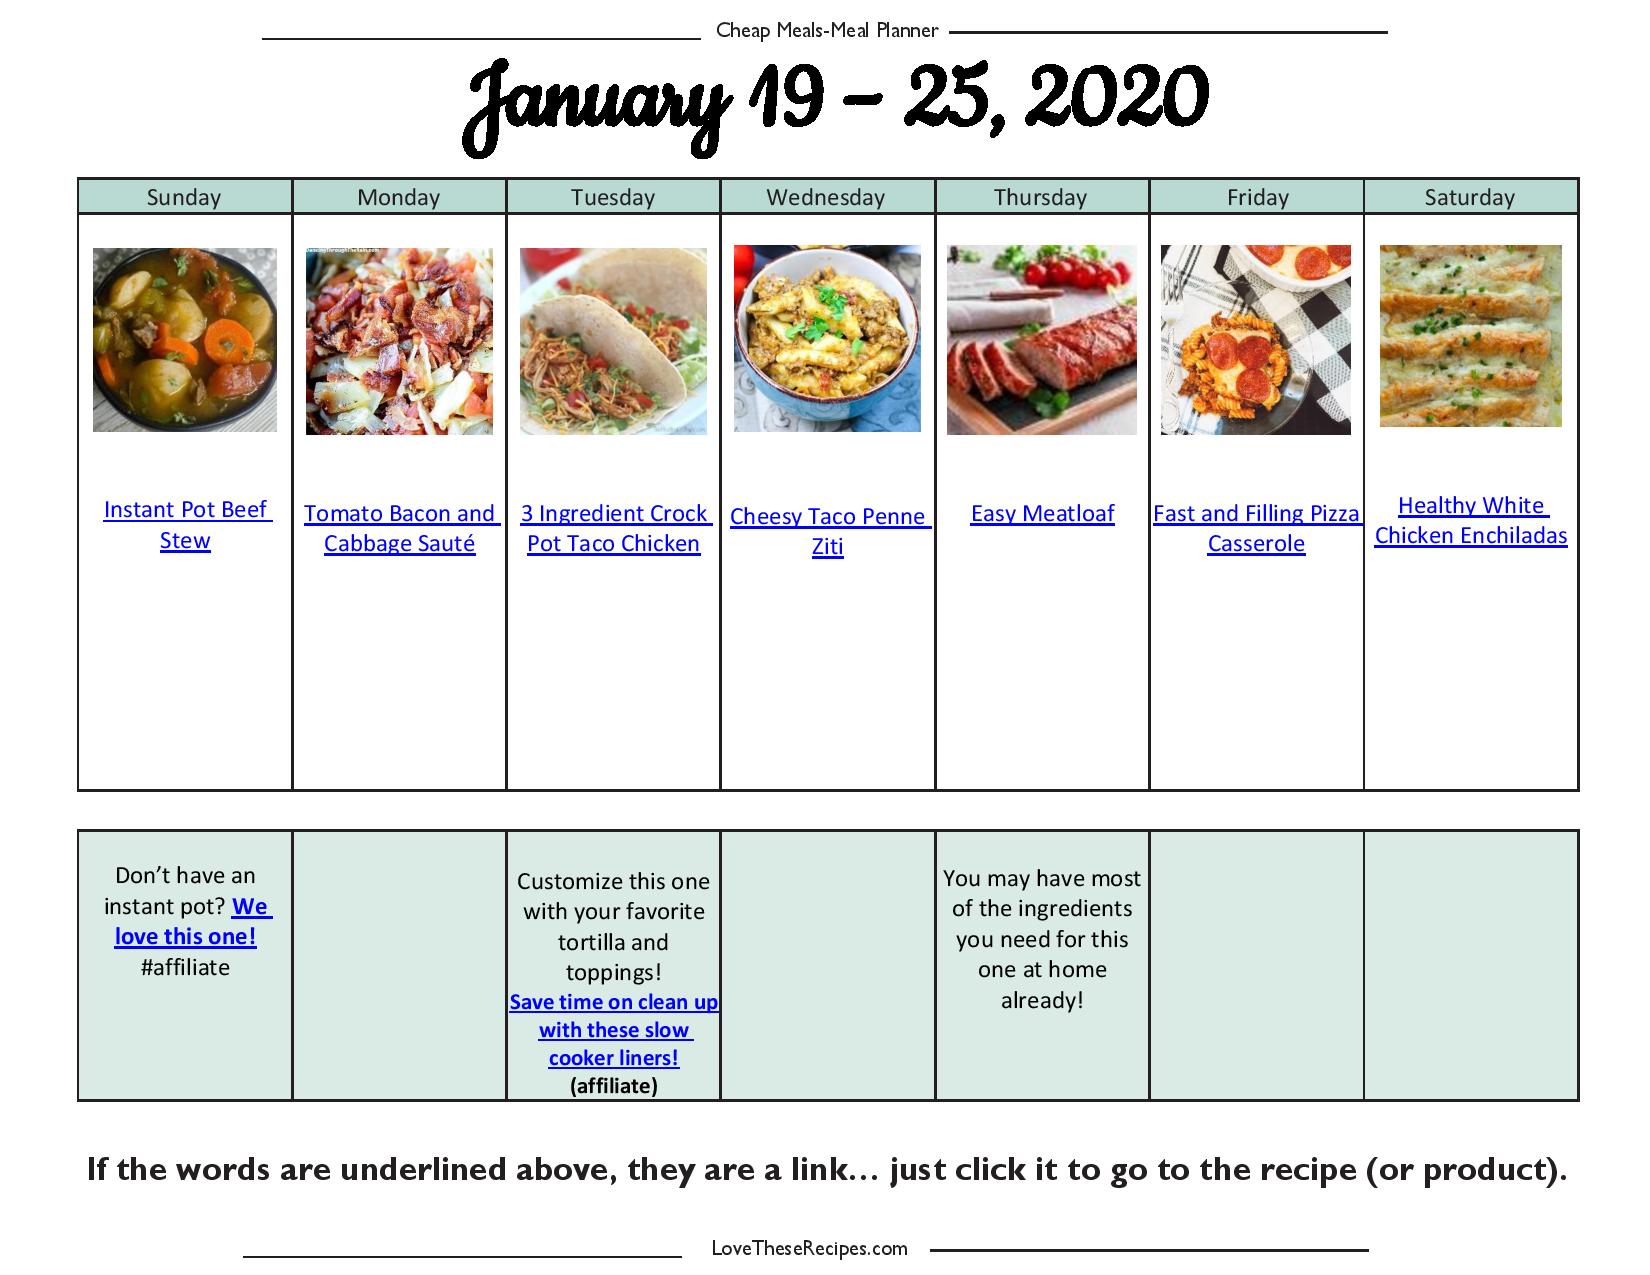 Discounted meal plans